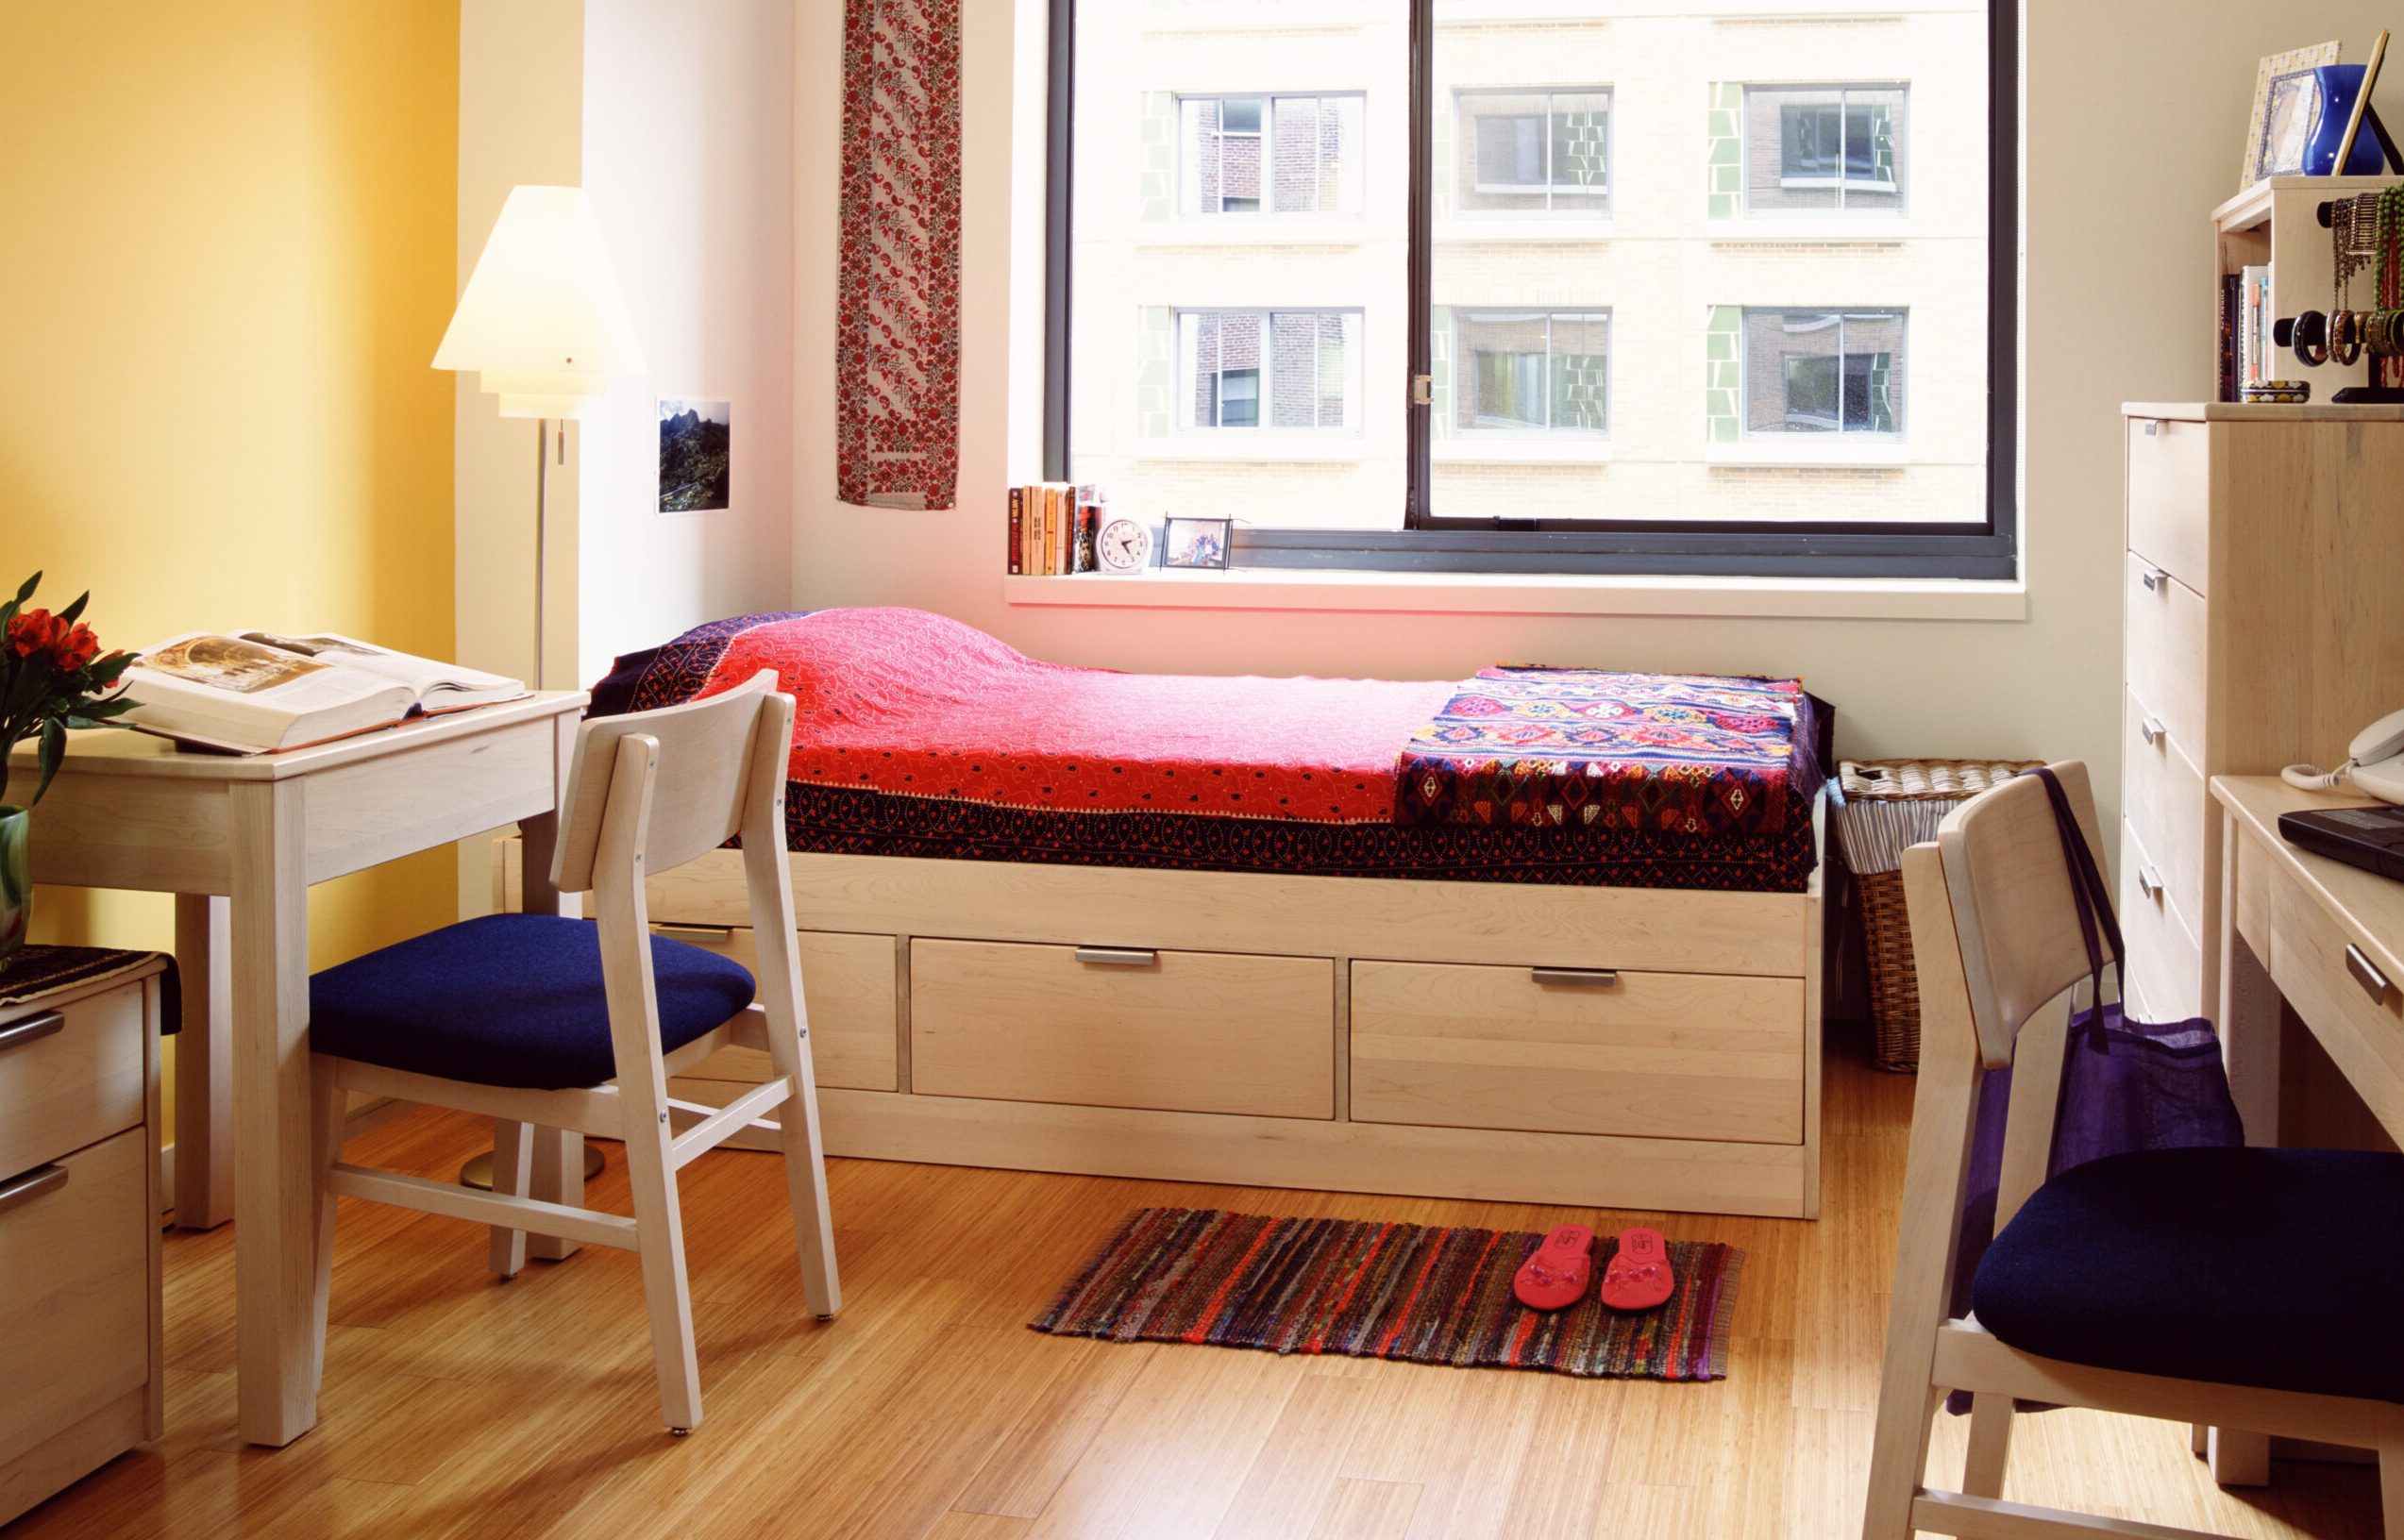 6 Essentials Every College Student Needs For Their Dorm Room